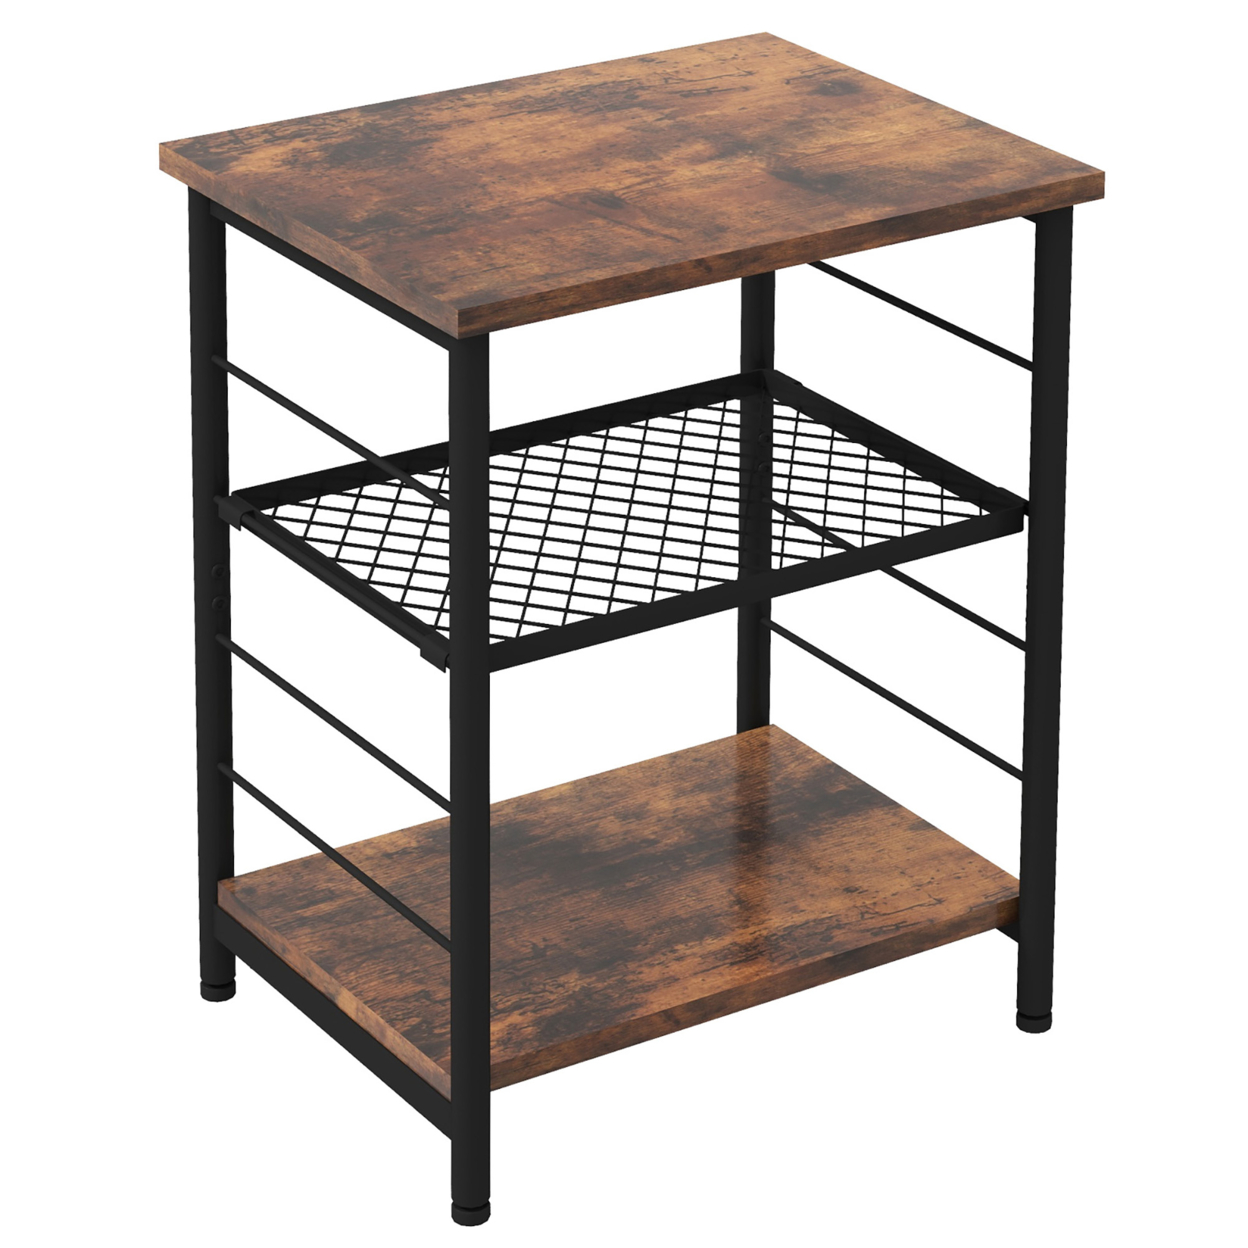 3-Tier Side Table Industrial End Table W/ Adjustable Height Metal Mesh Shelf